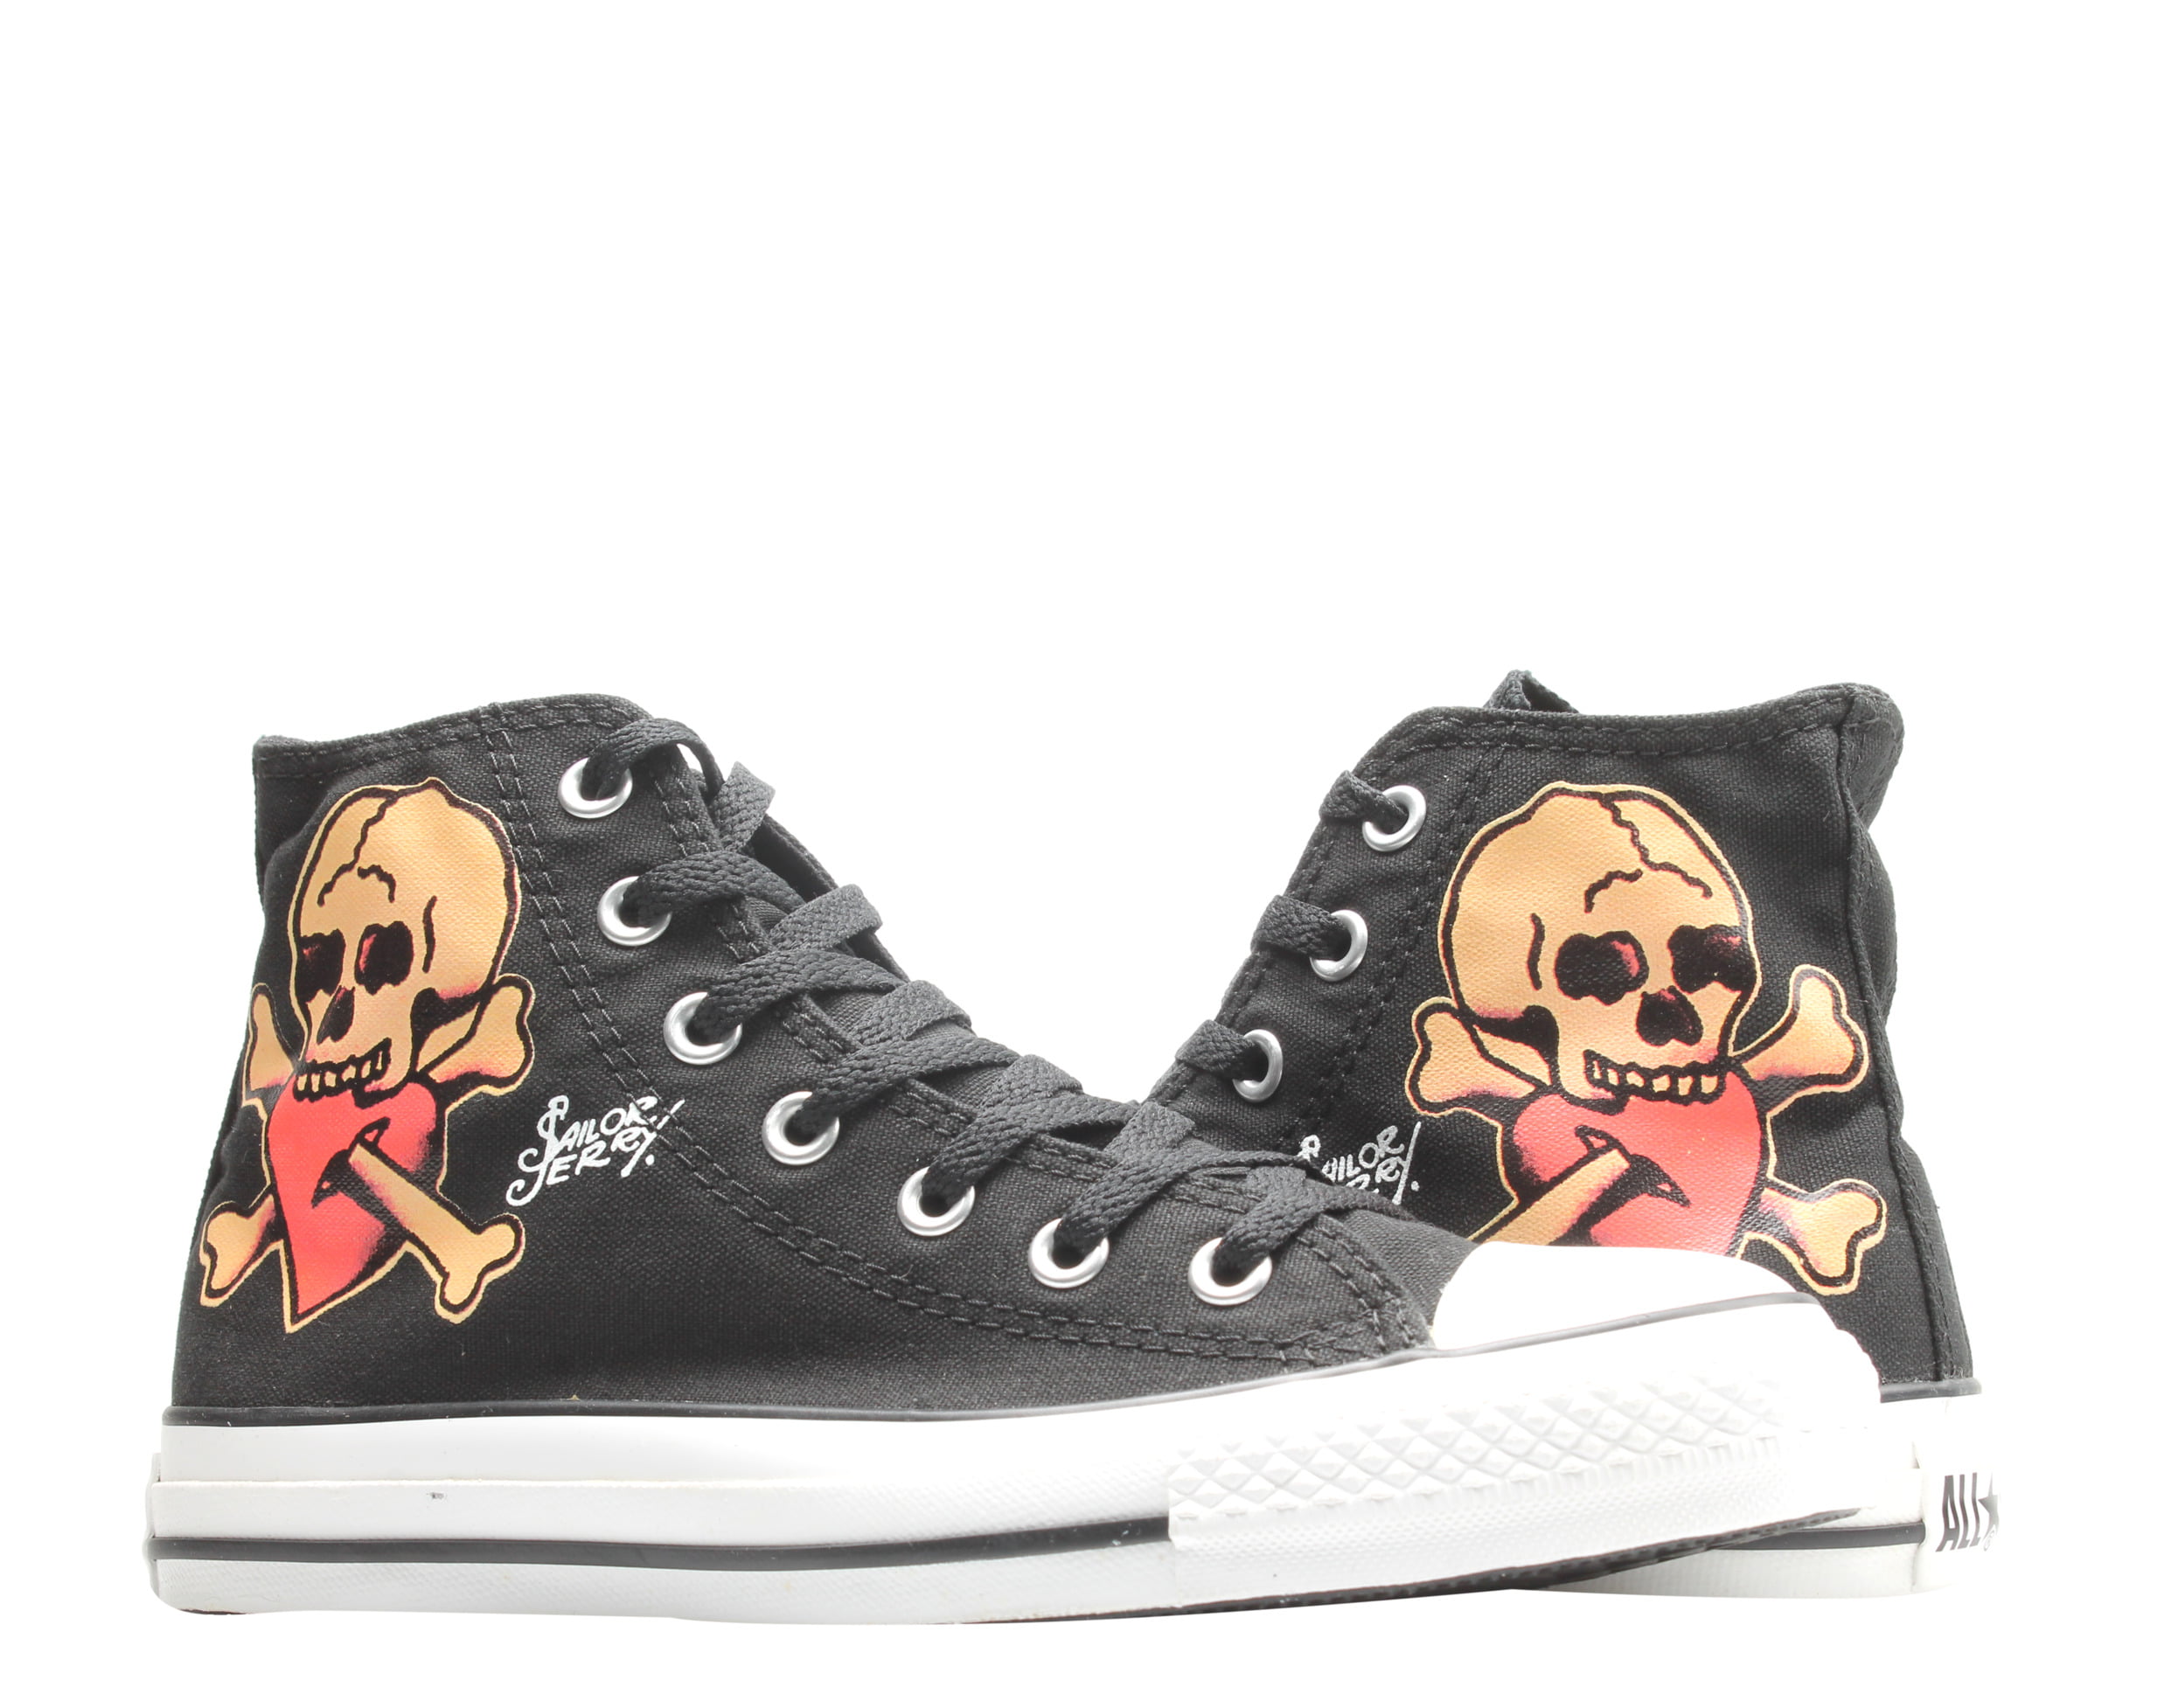 Converse Chuck Taylor All Star Sailor Jerry Skull Hi Sneakers Size  -  